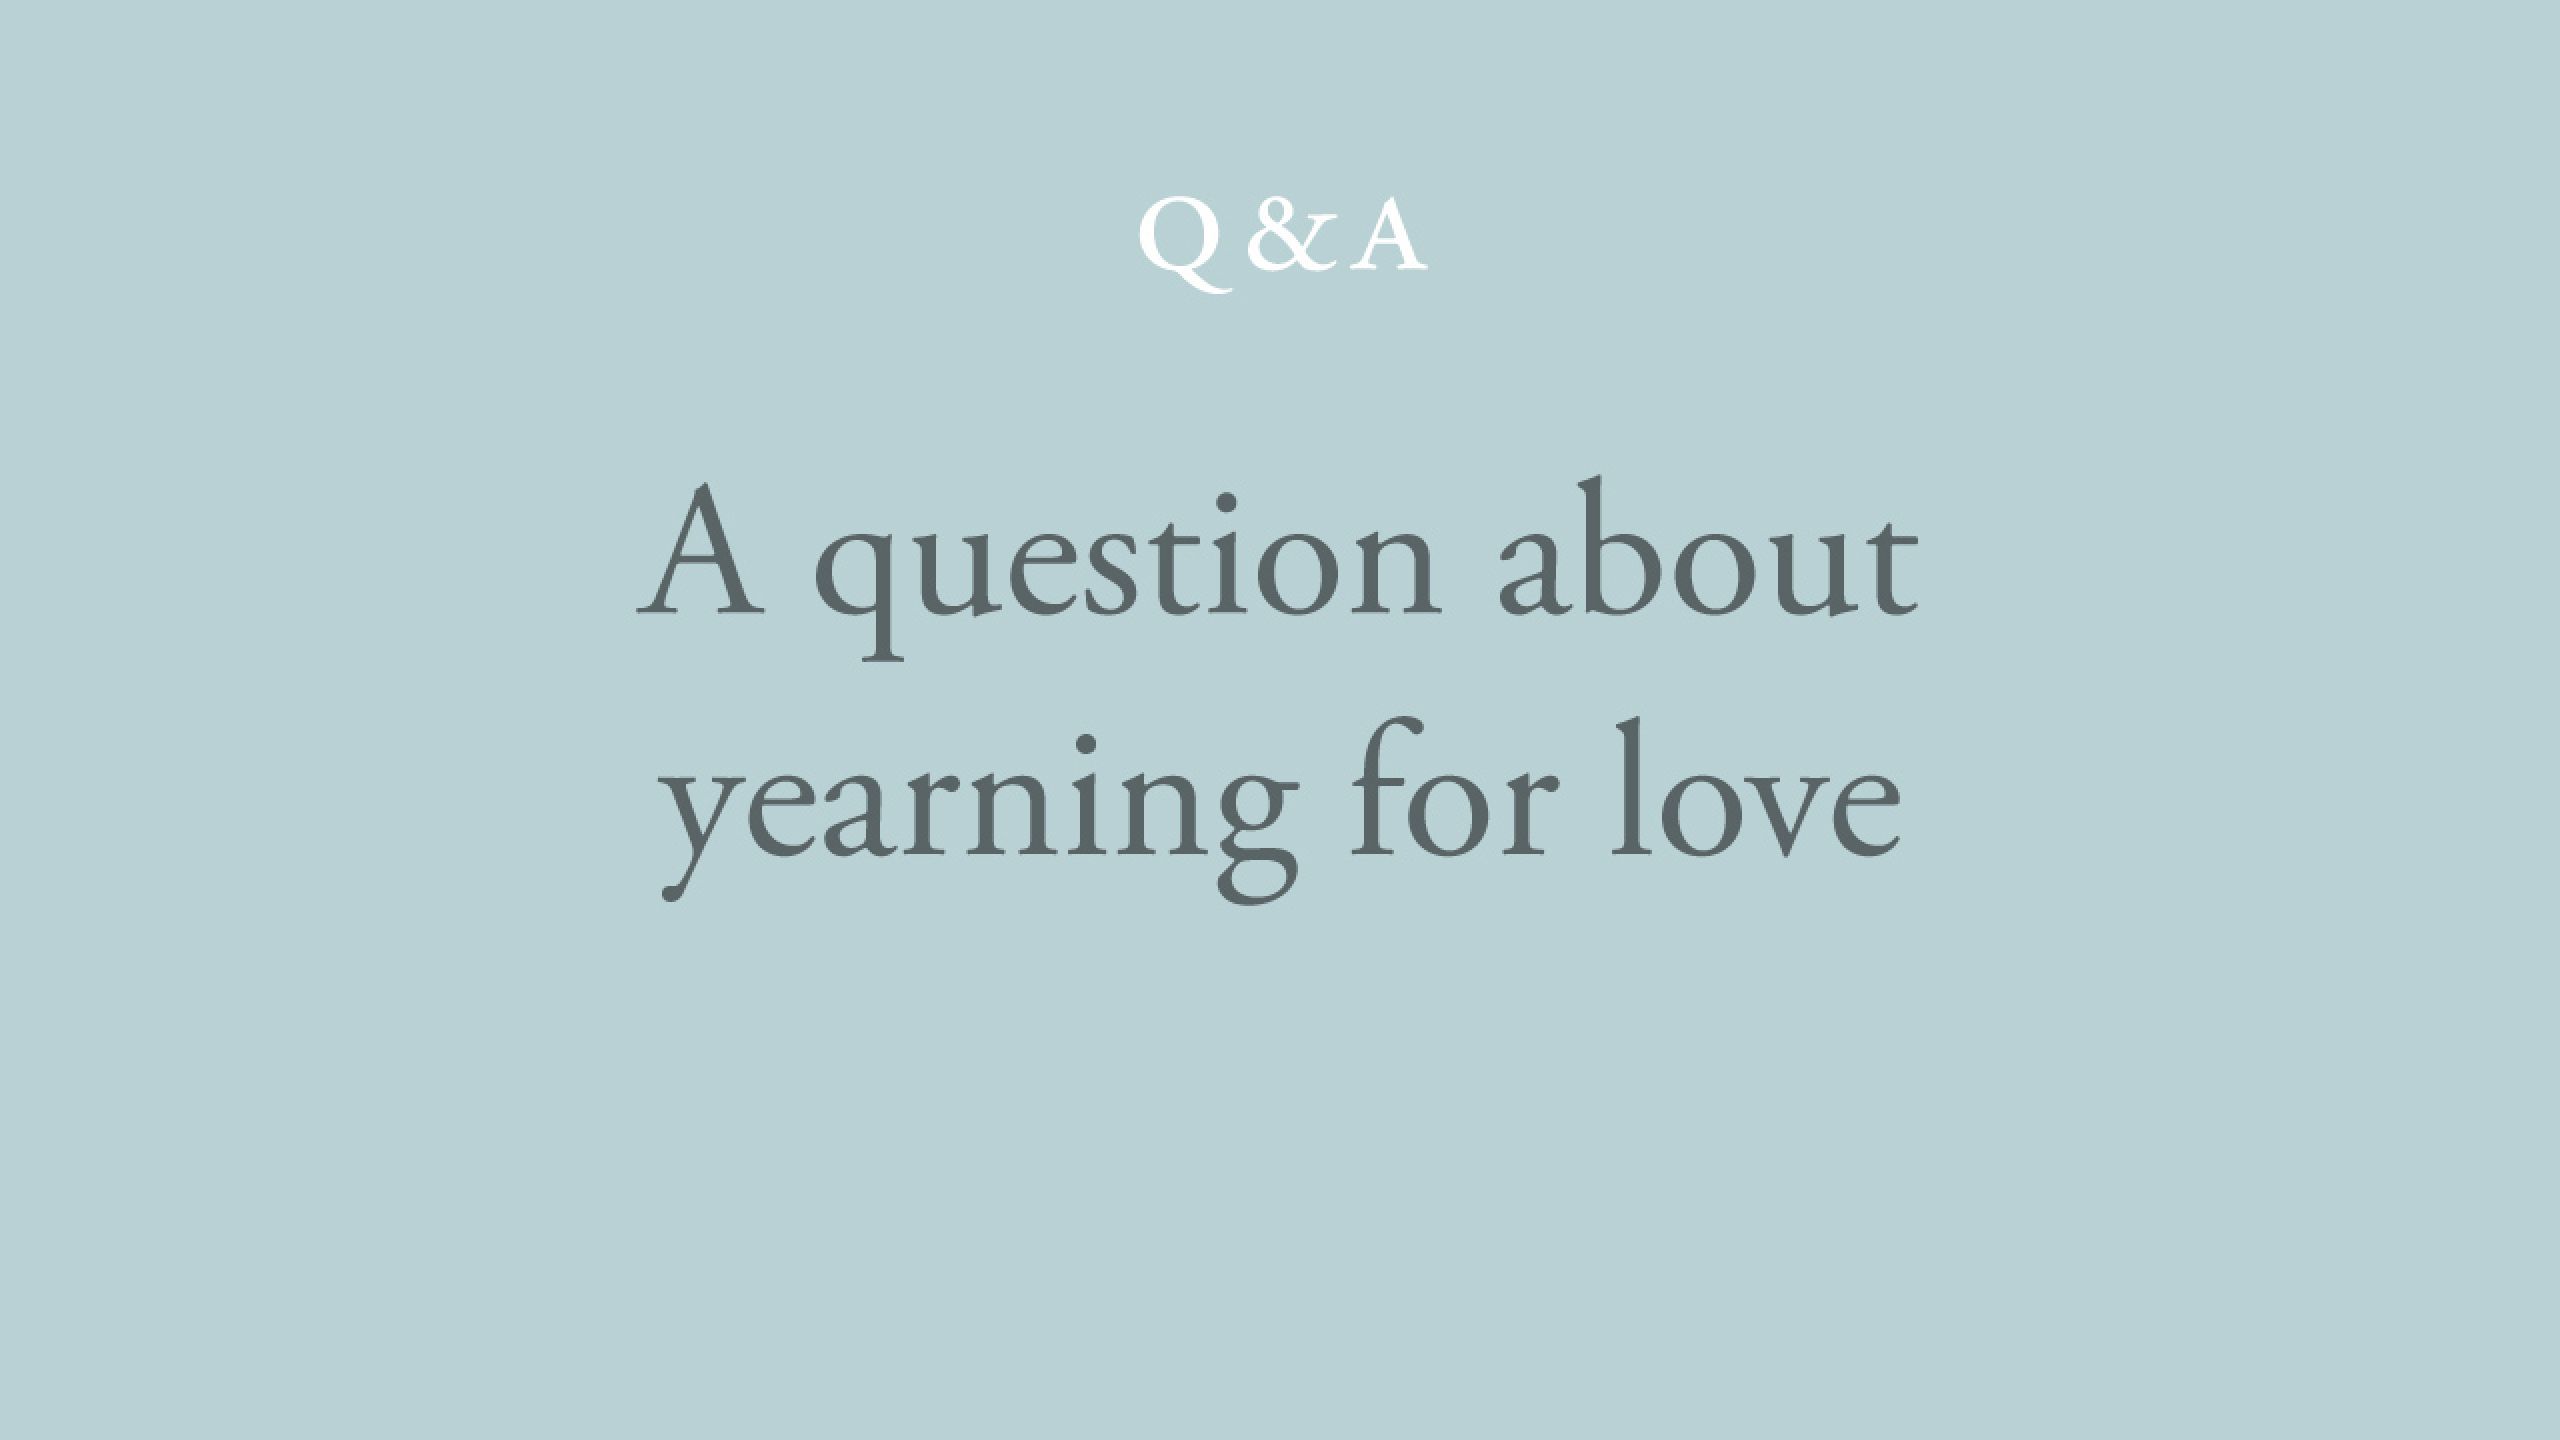 Why do I have this yearning for love?